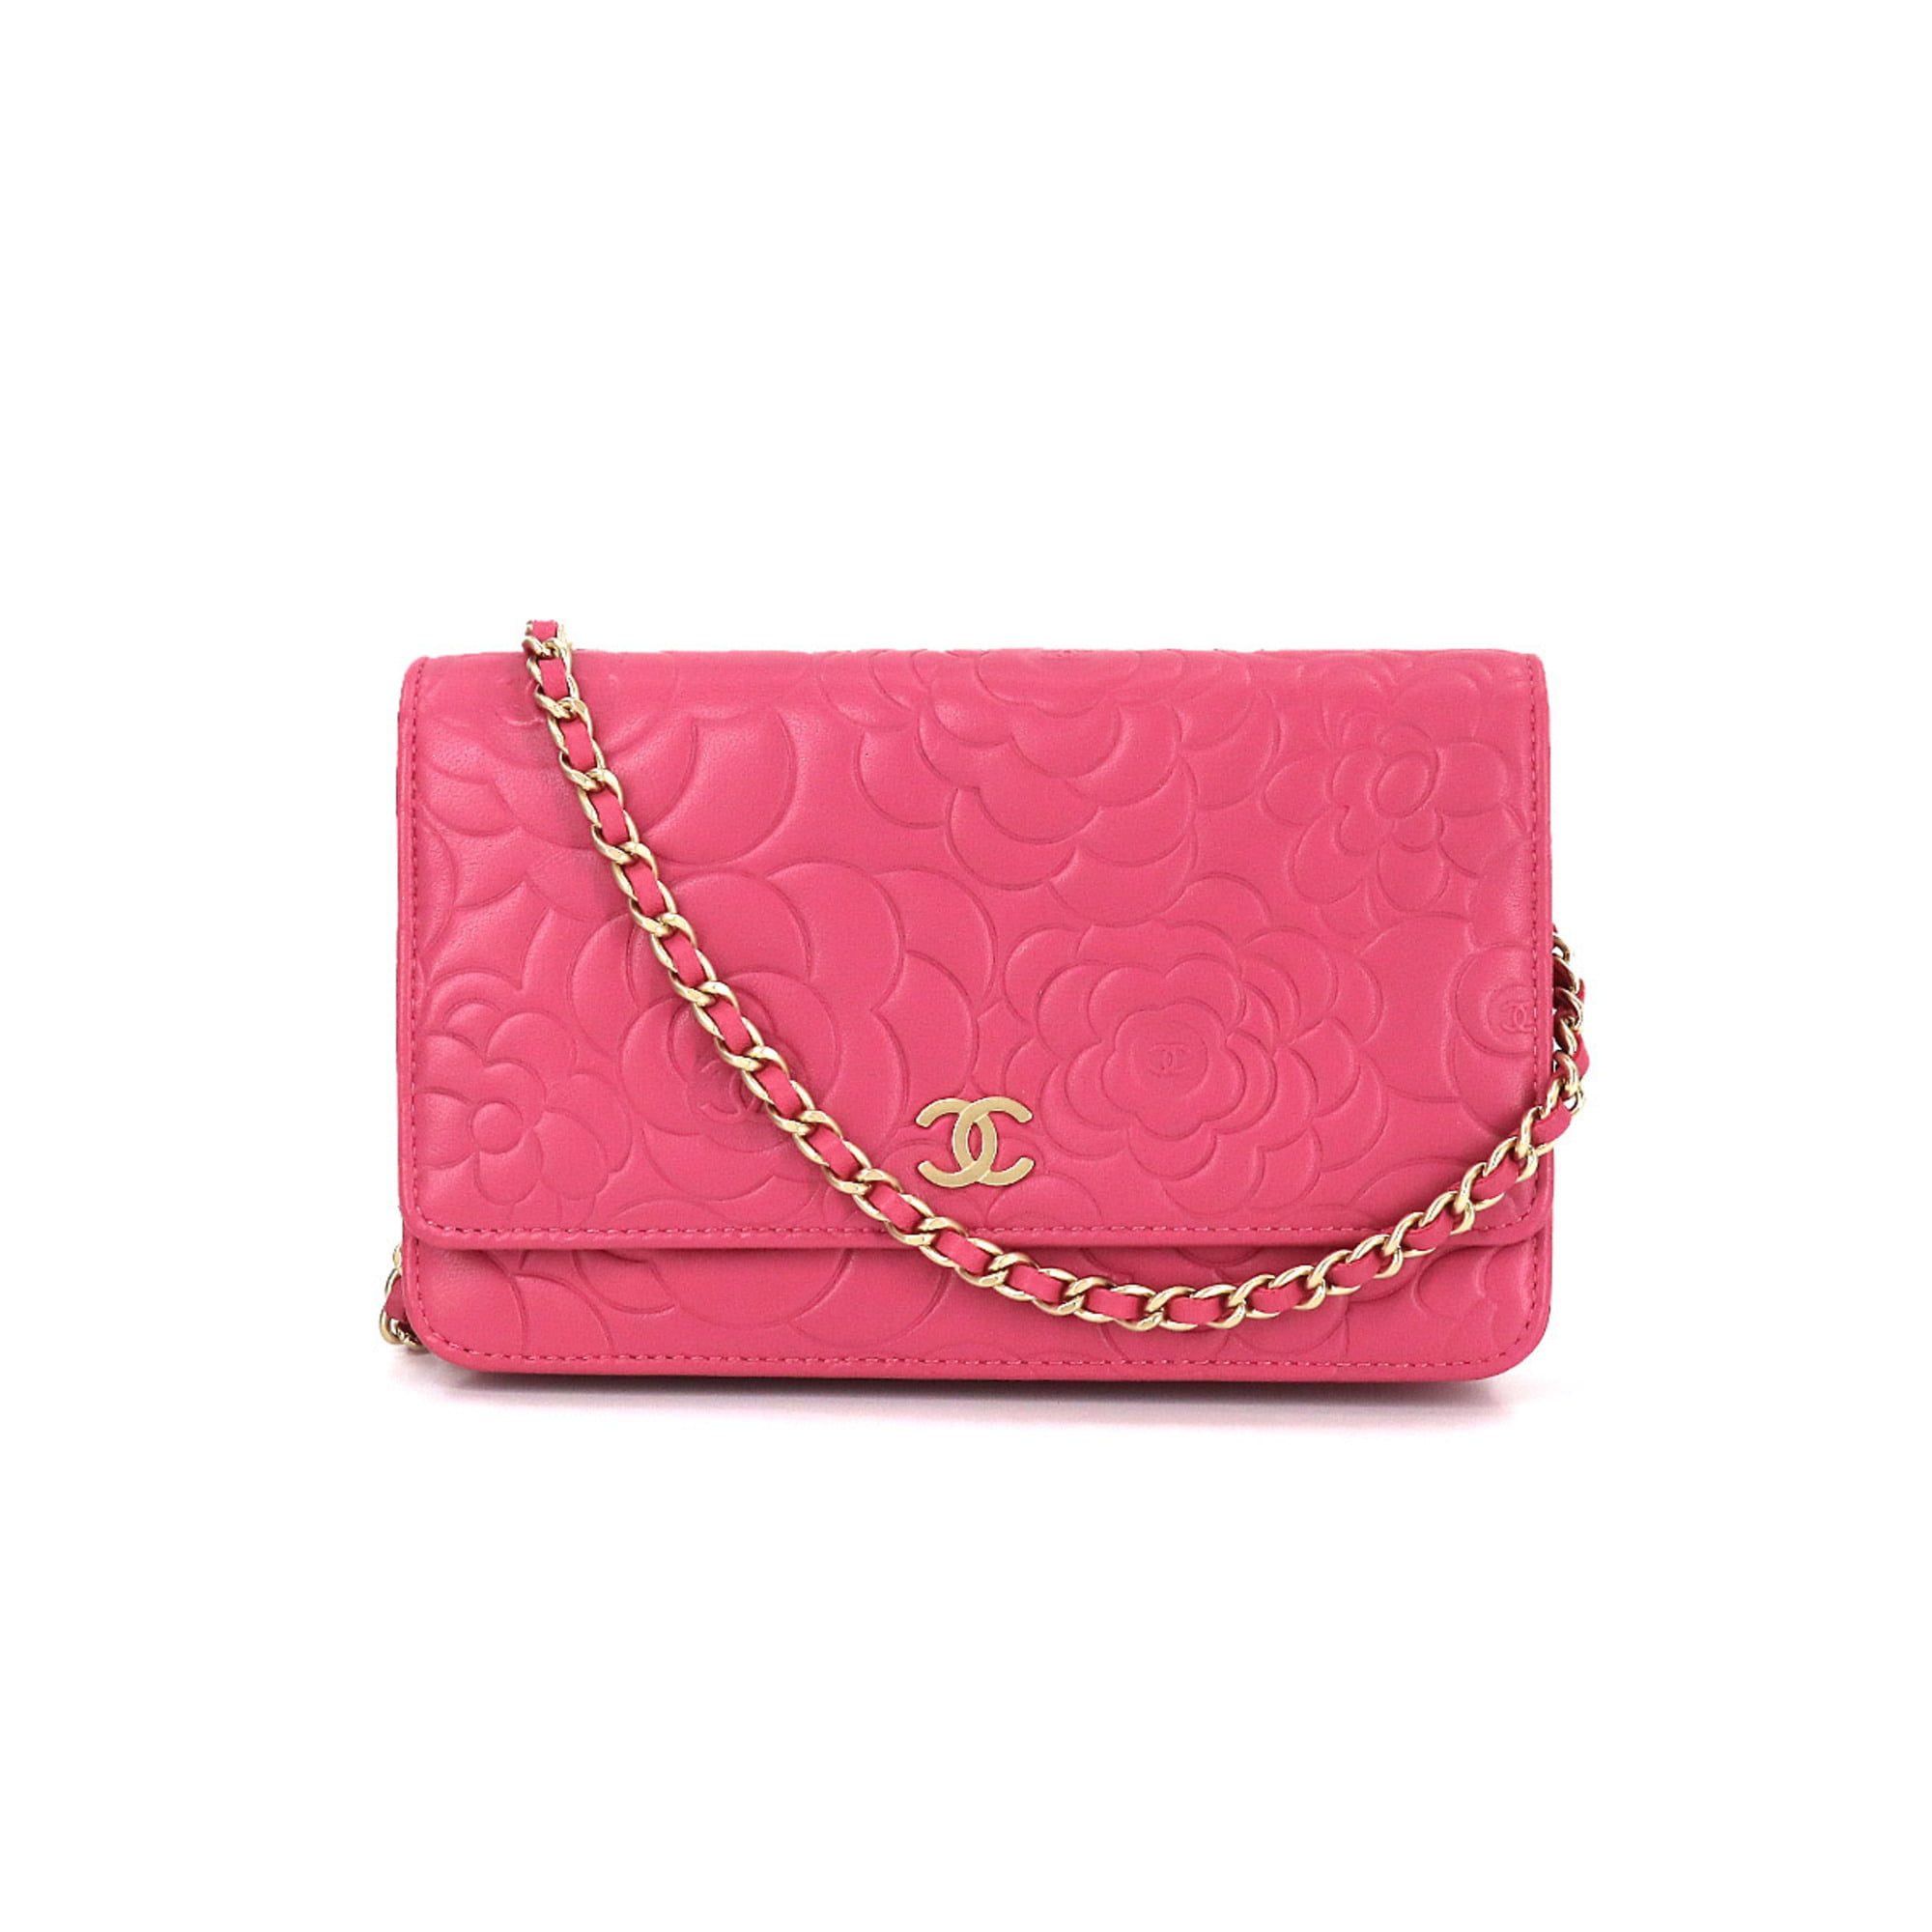 Authenticated Used Chanel CHANEL camellia chain wallet long leather pink  gold metal fittings A82336 Camellia Wallet 